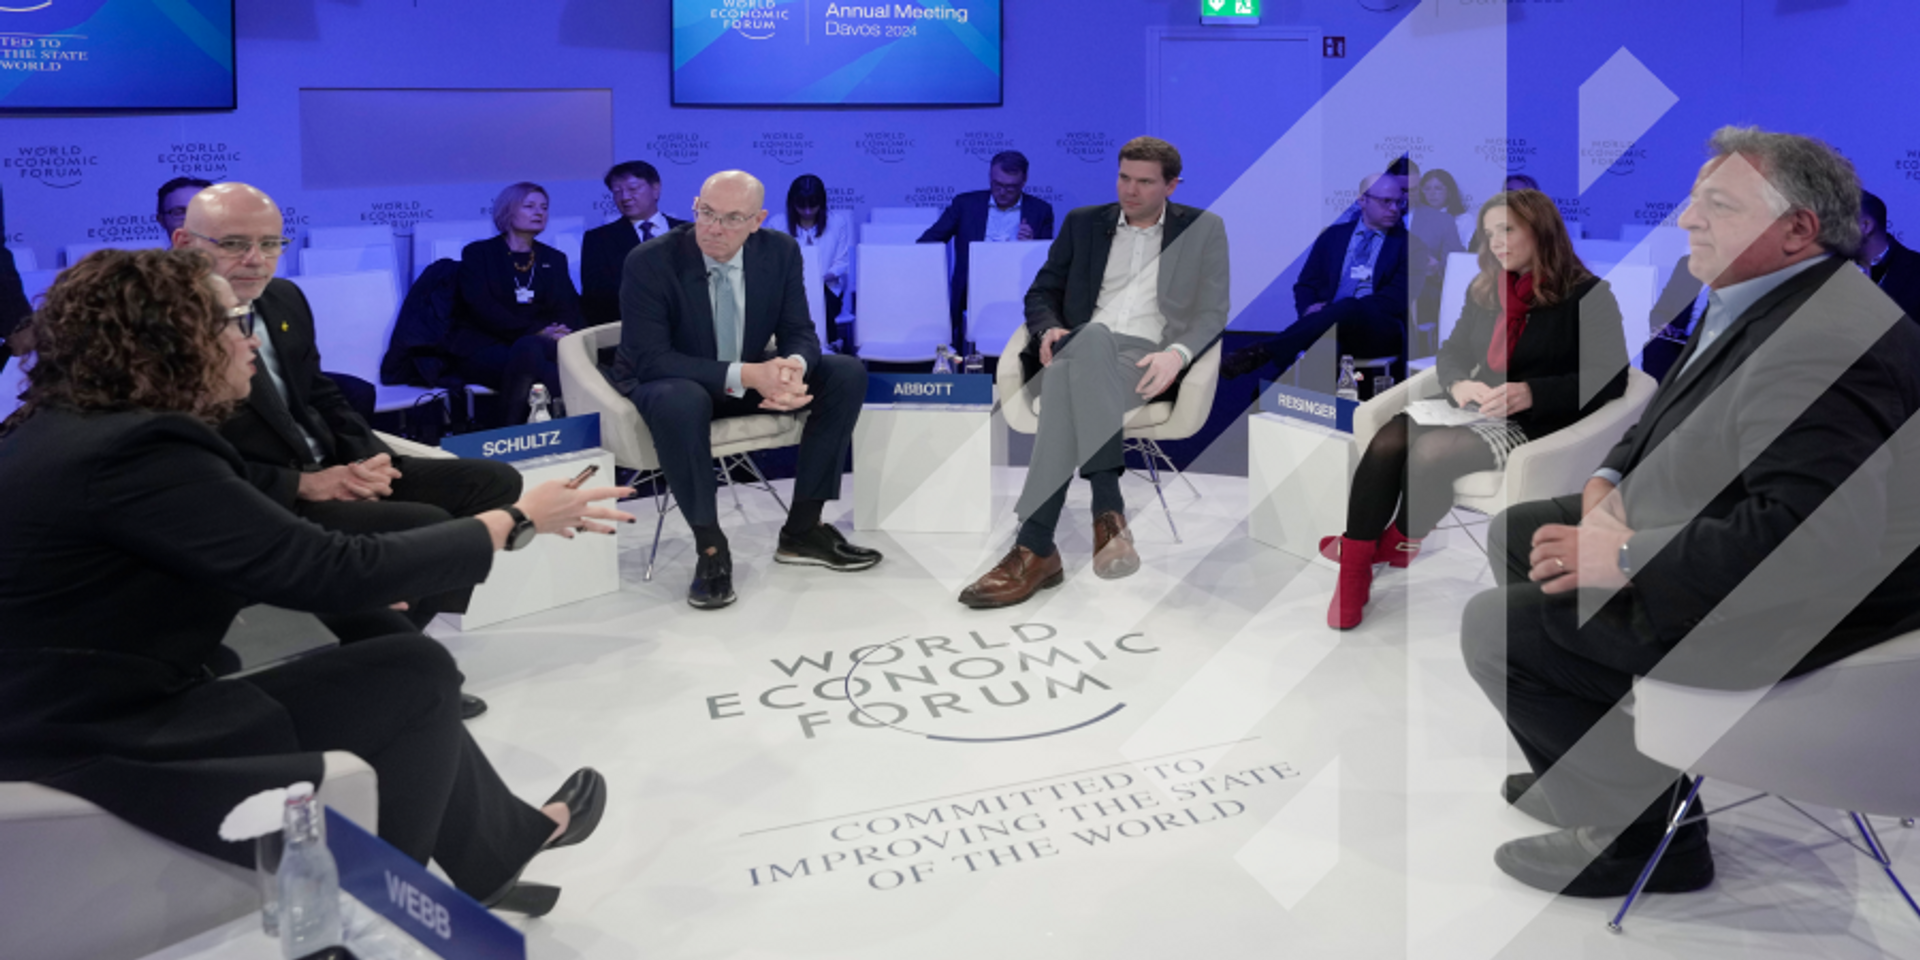 WEF Annual Meeting Spotlights Collaboration Across Sectors